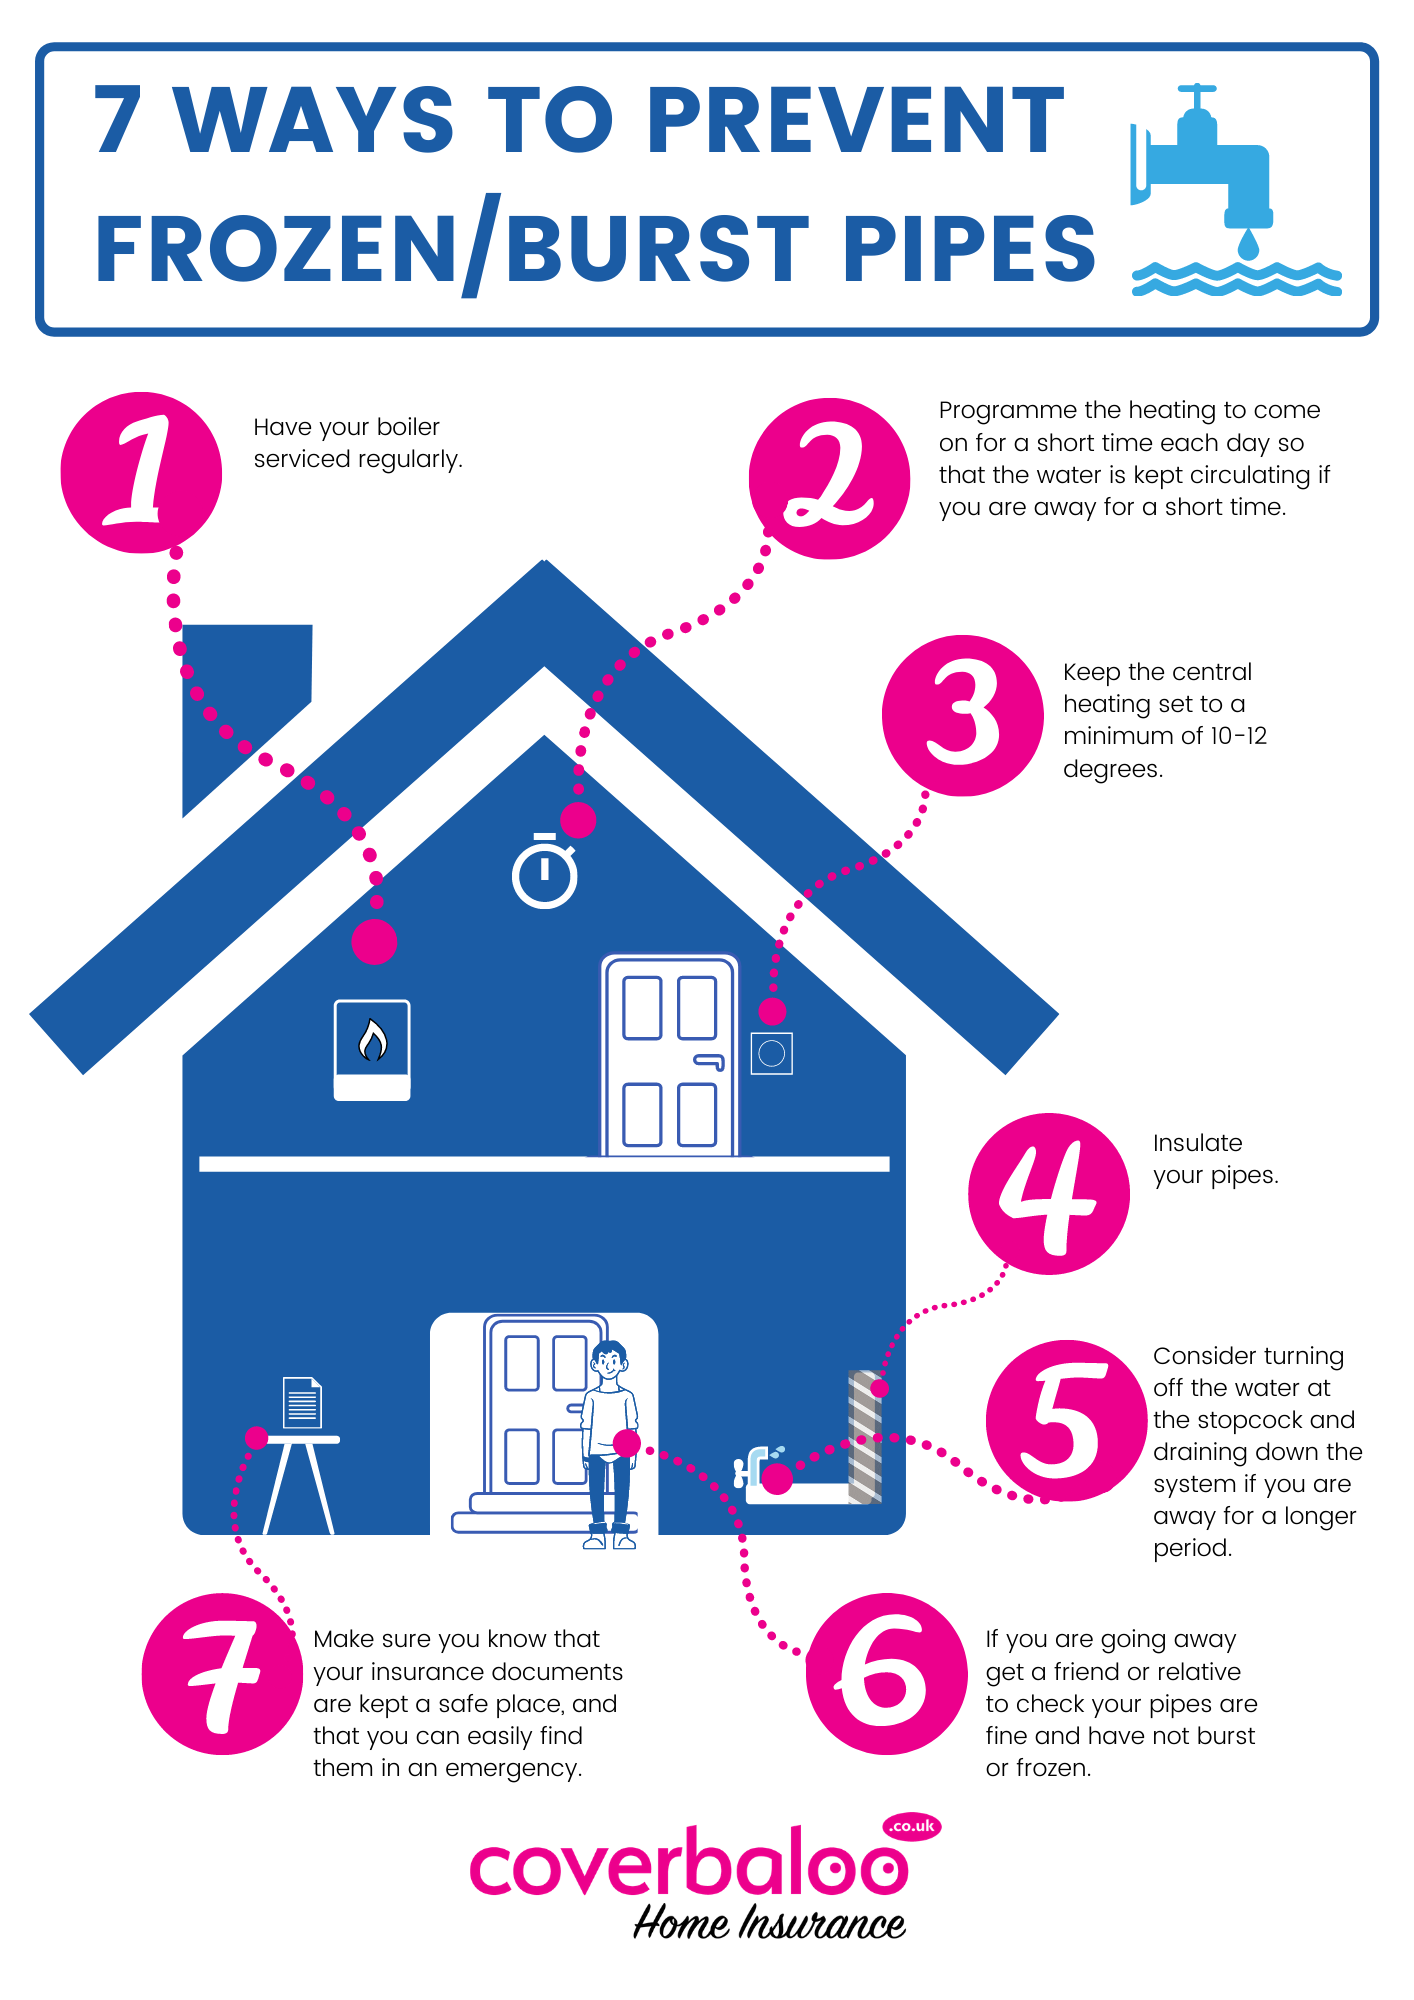 Infographic of 7 ways to prevent frozen or burst pipes